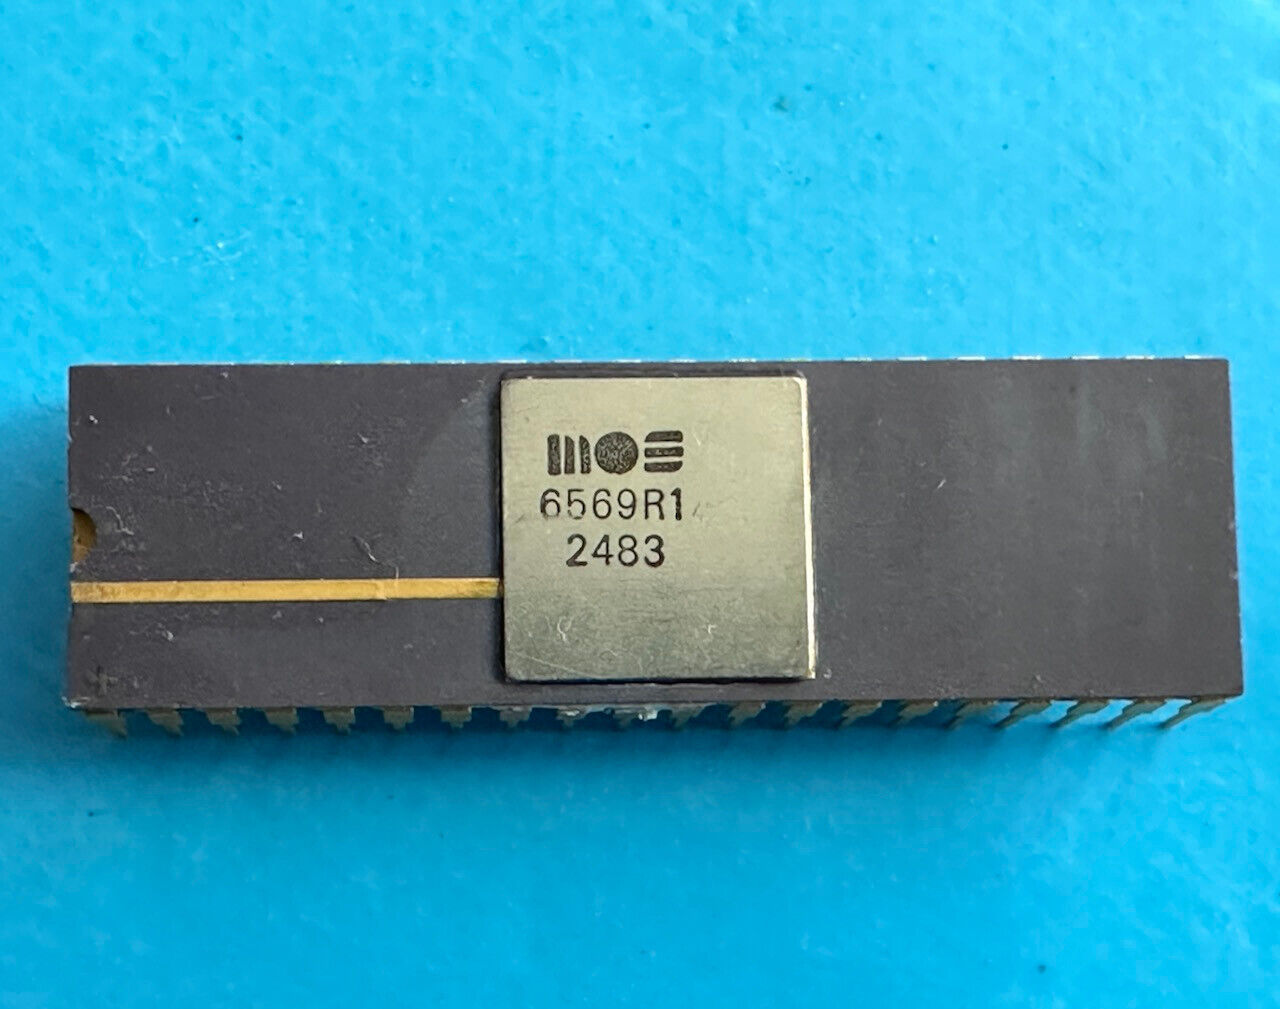 6569R1 Vic Video Chip Ic for Commodore C64, SX64, Ceramic Gold, Works #24 83